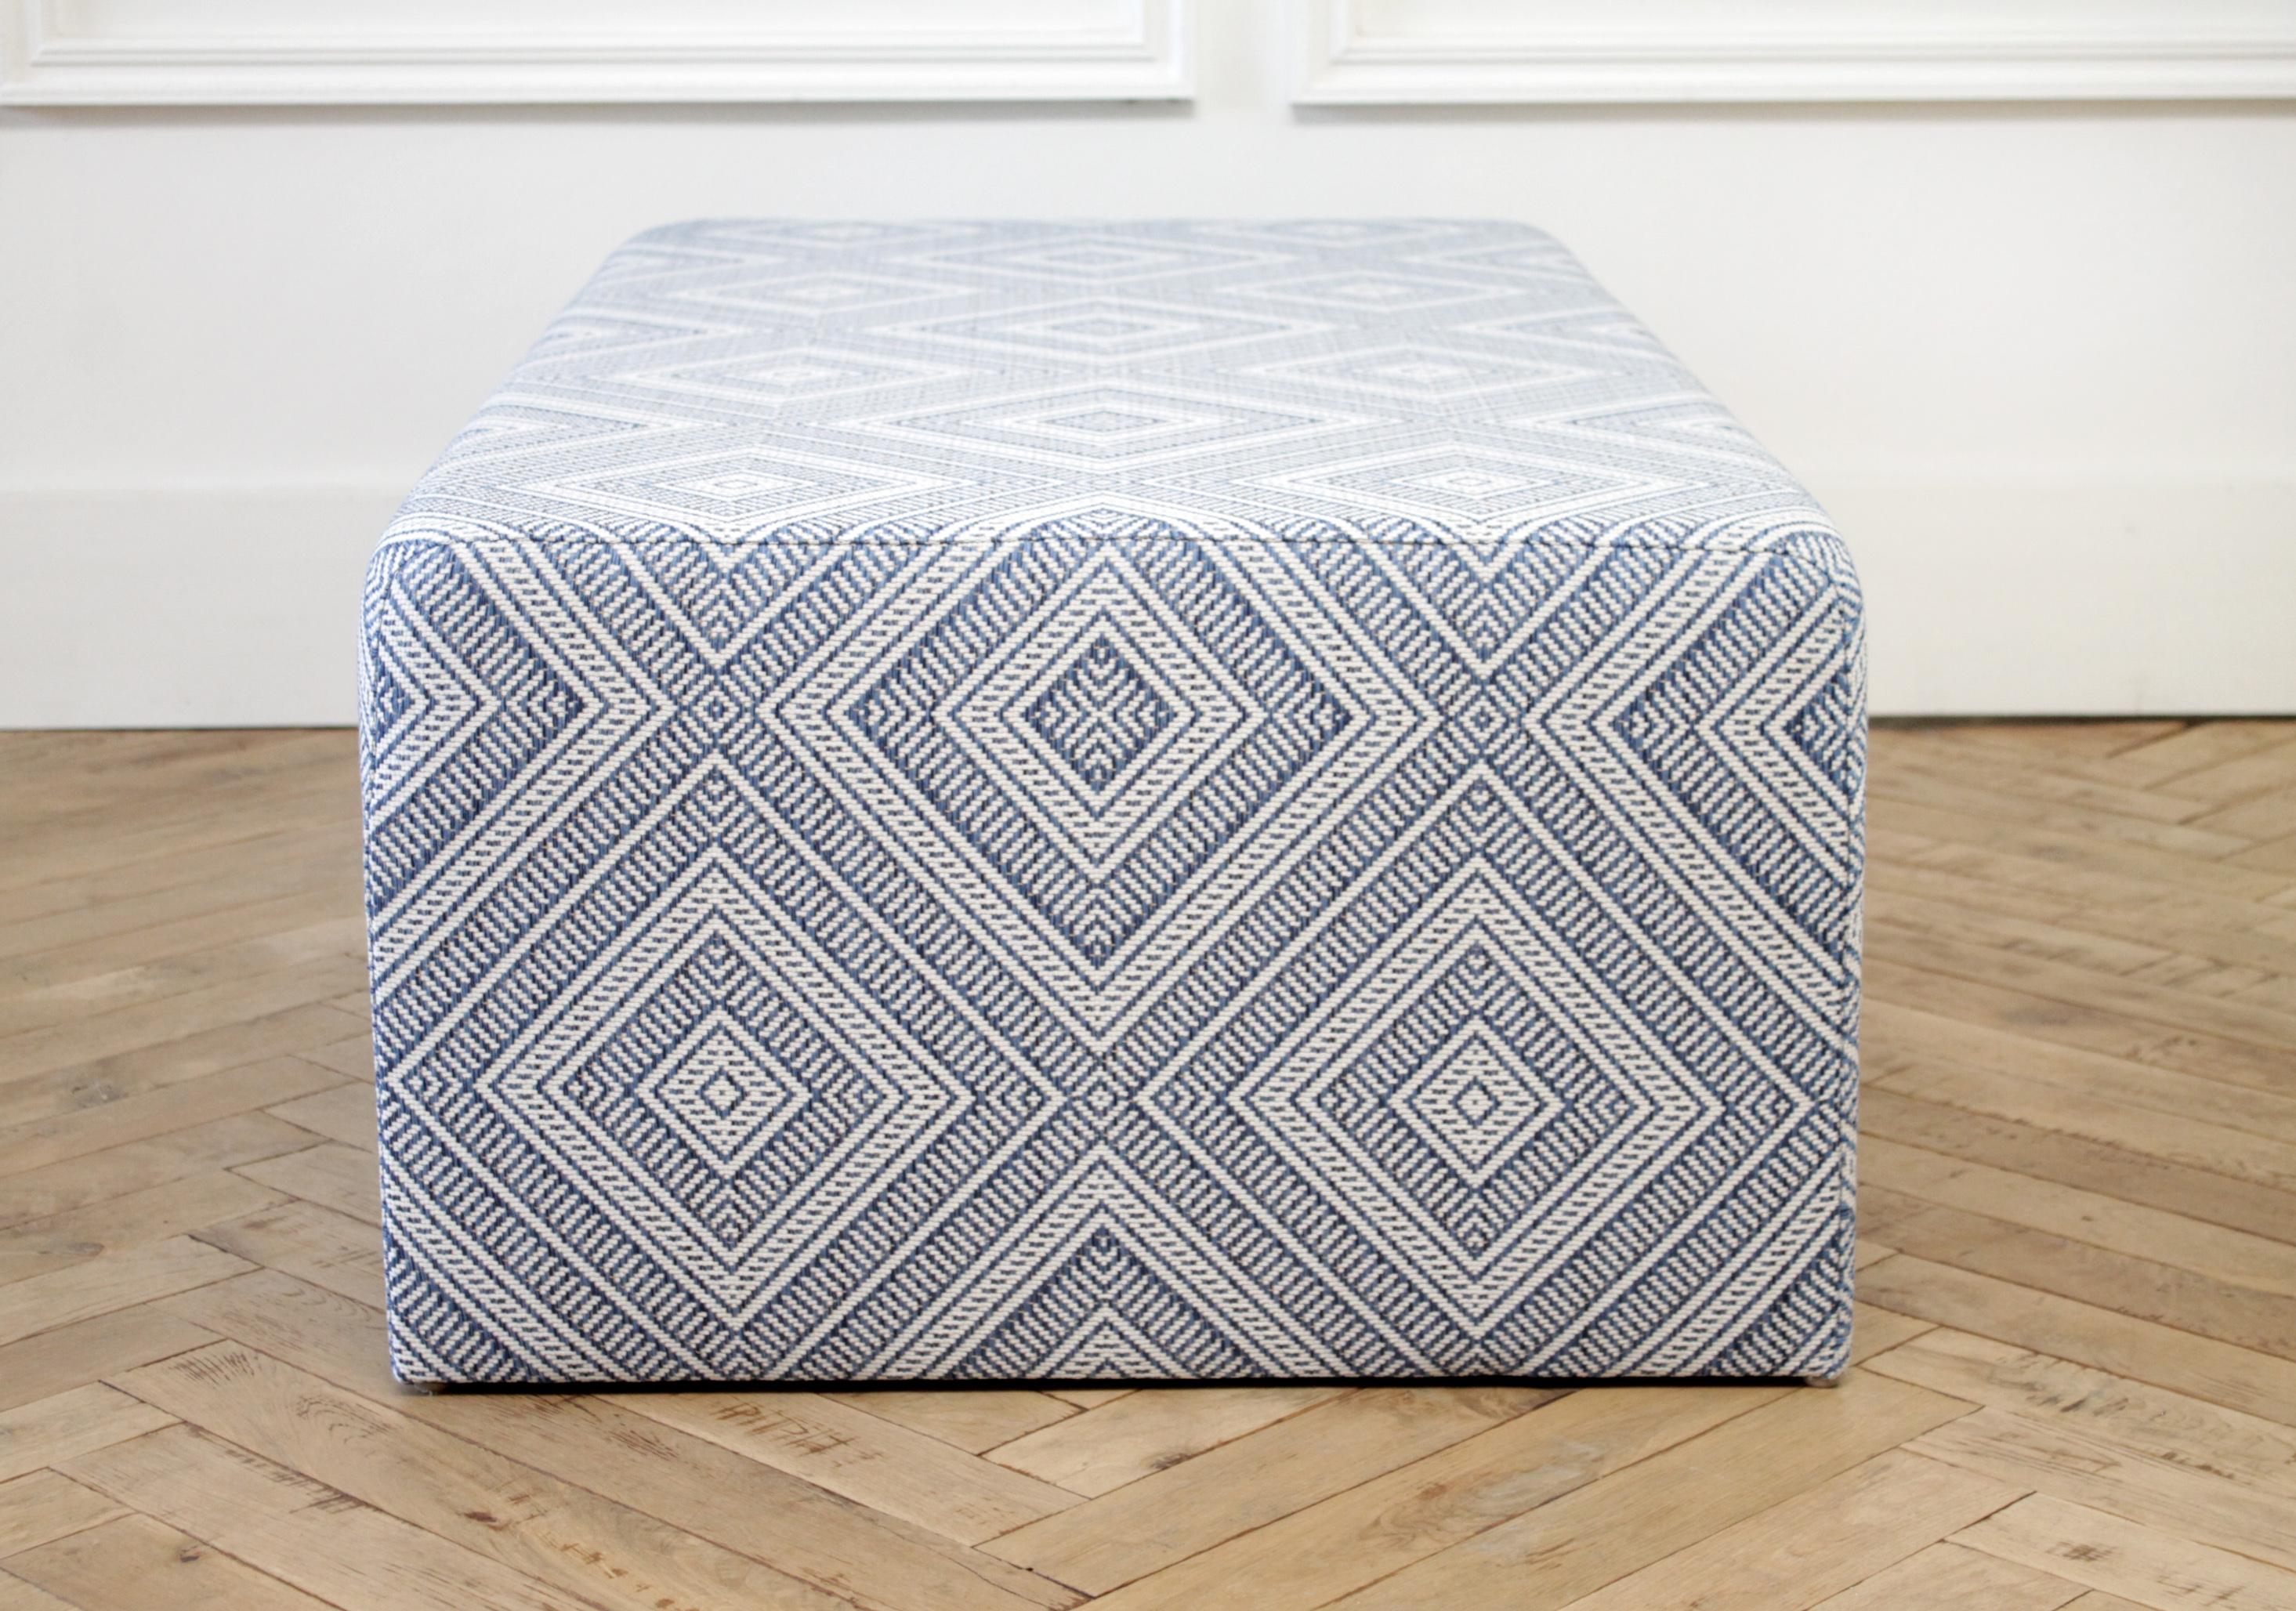 Wood Custom Made Cube Cocktail Ottoman in Blue Diamond Fabric from France